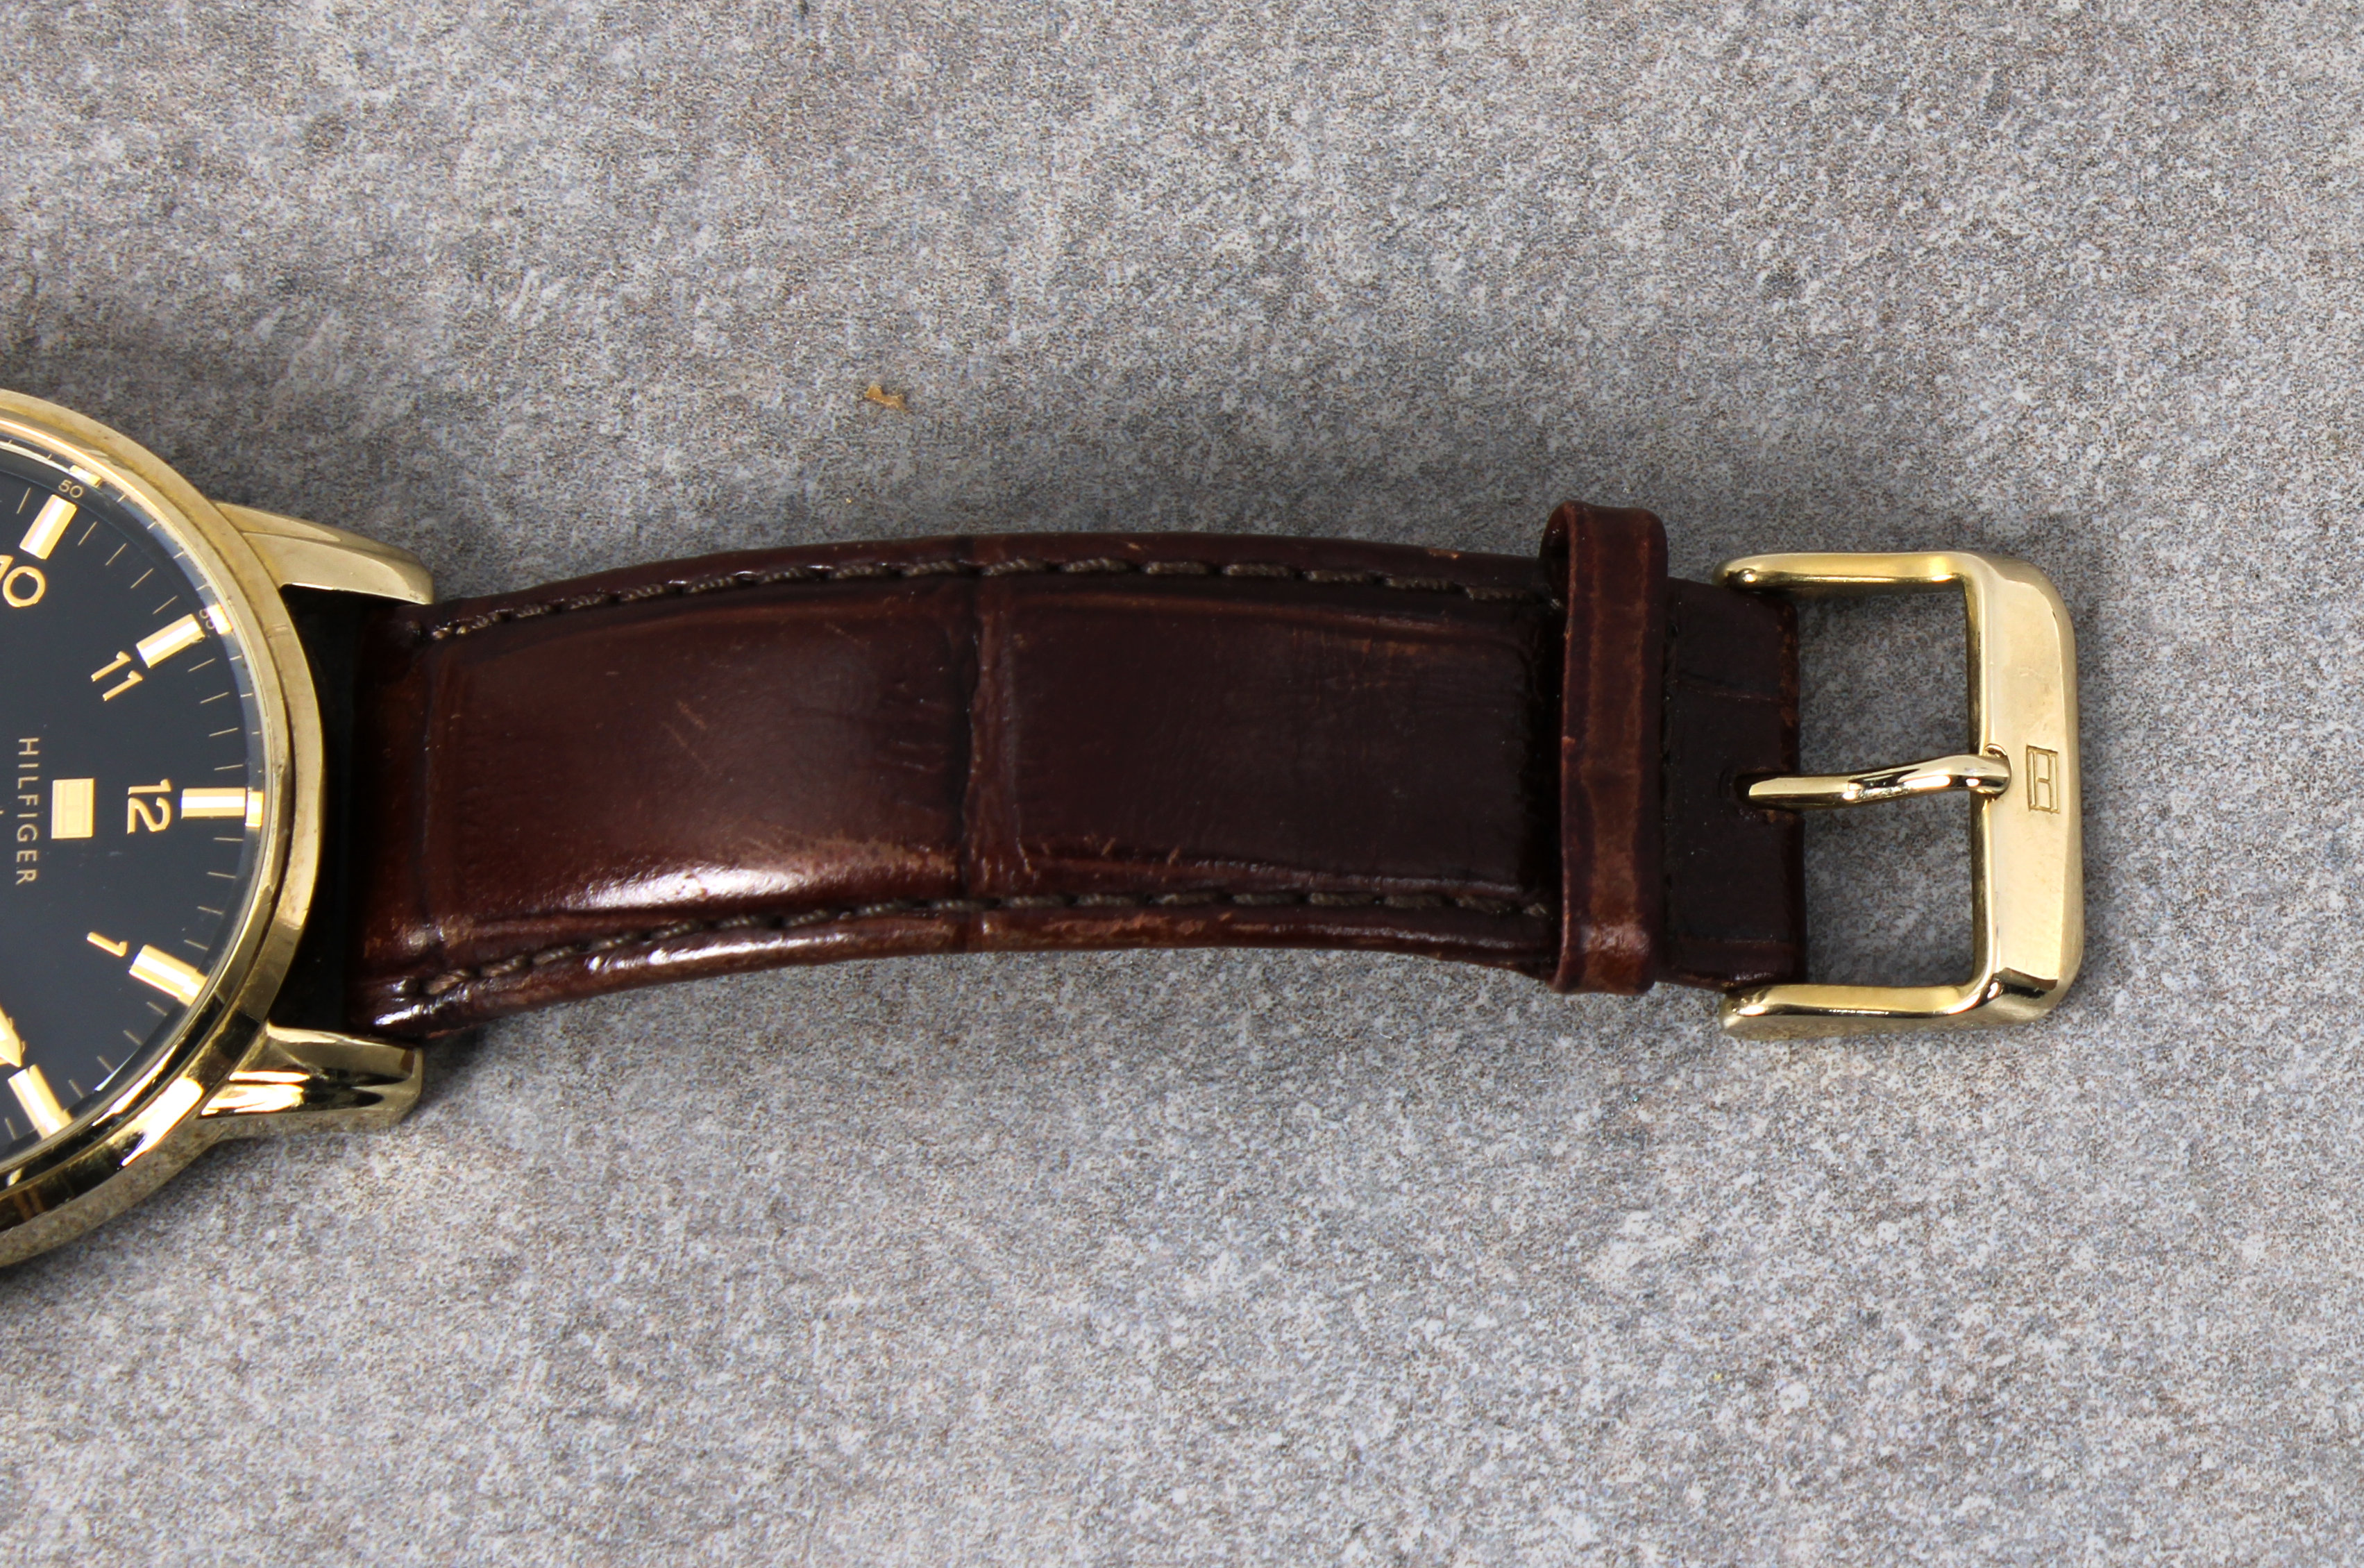 Tommy Hilfiger Men's Gold-Tone Watch with Brown Leather Strap - Image 4 of 4